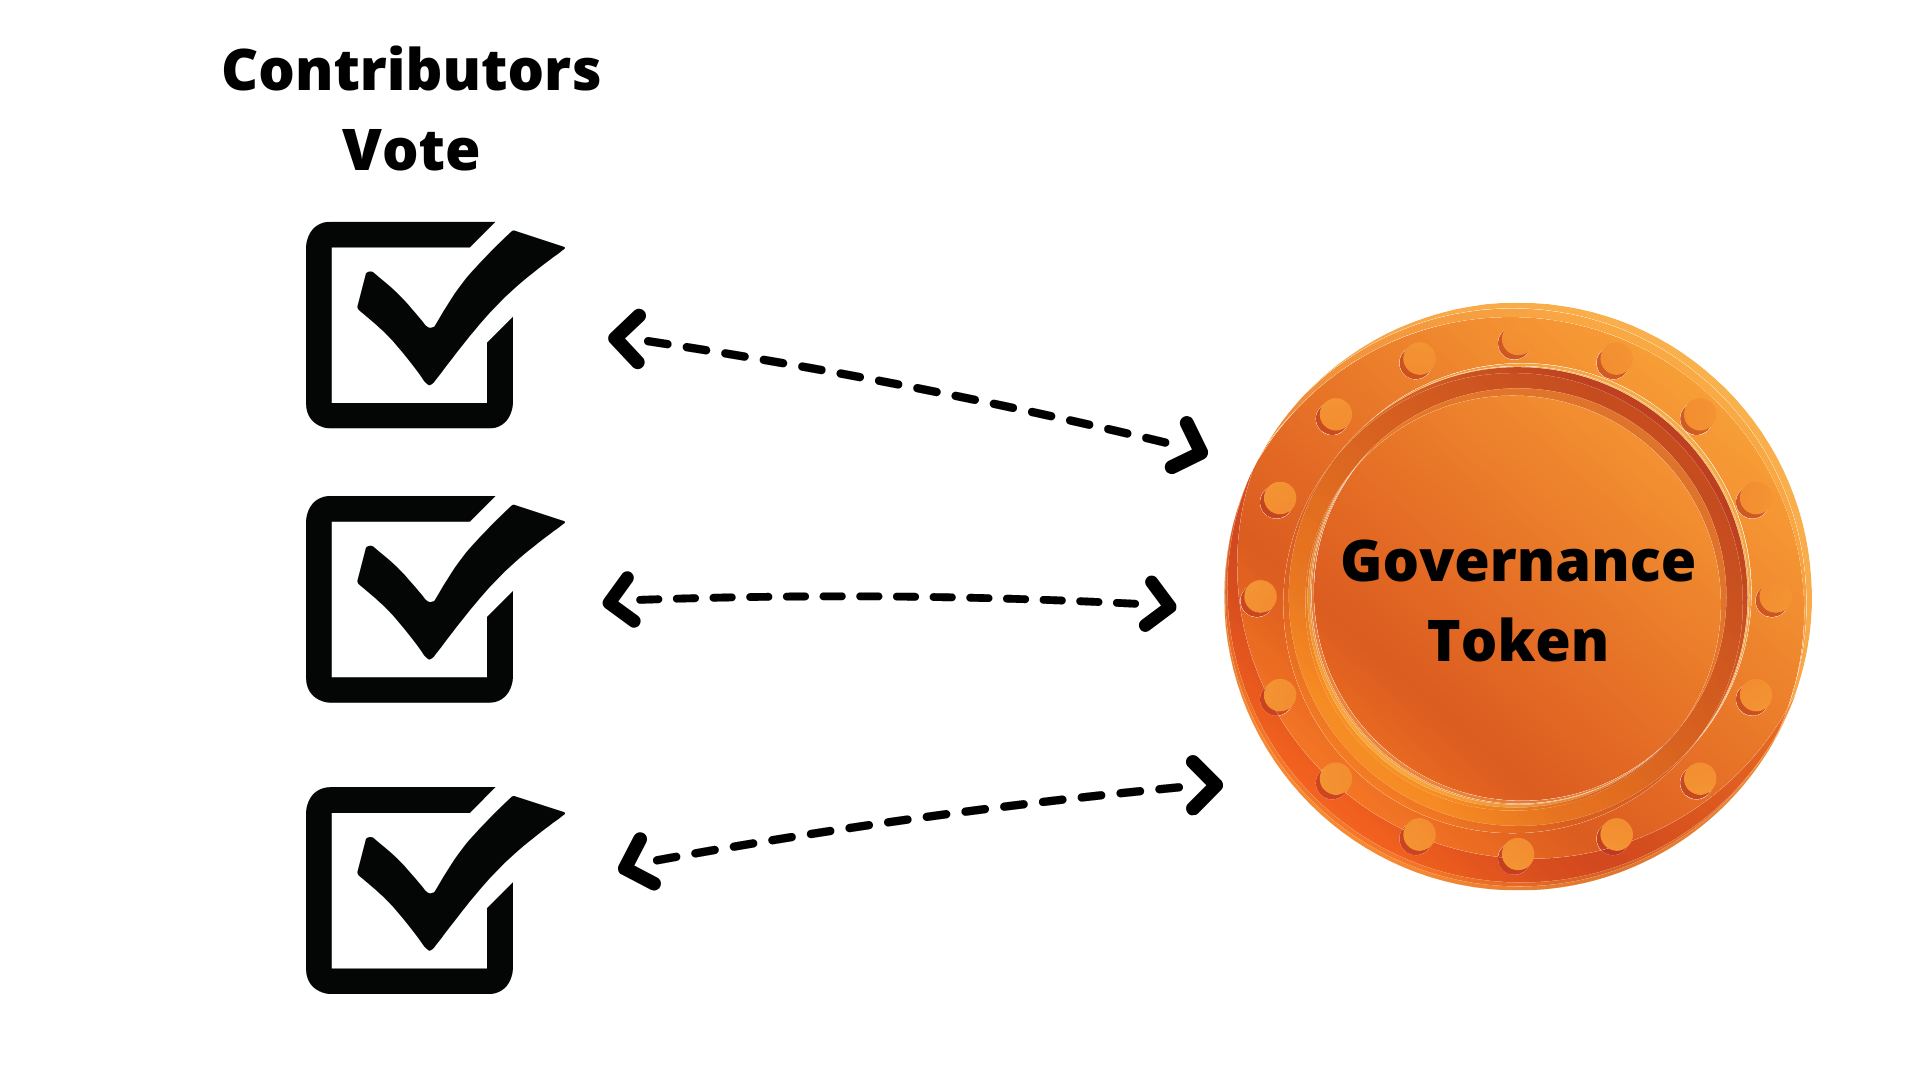 Contributors can vote if they have the governance token.